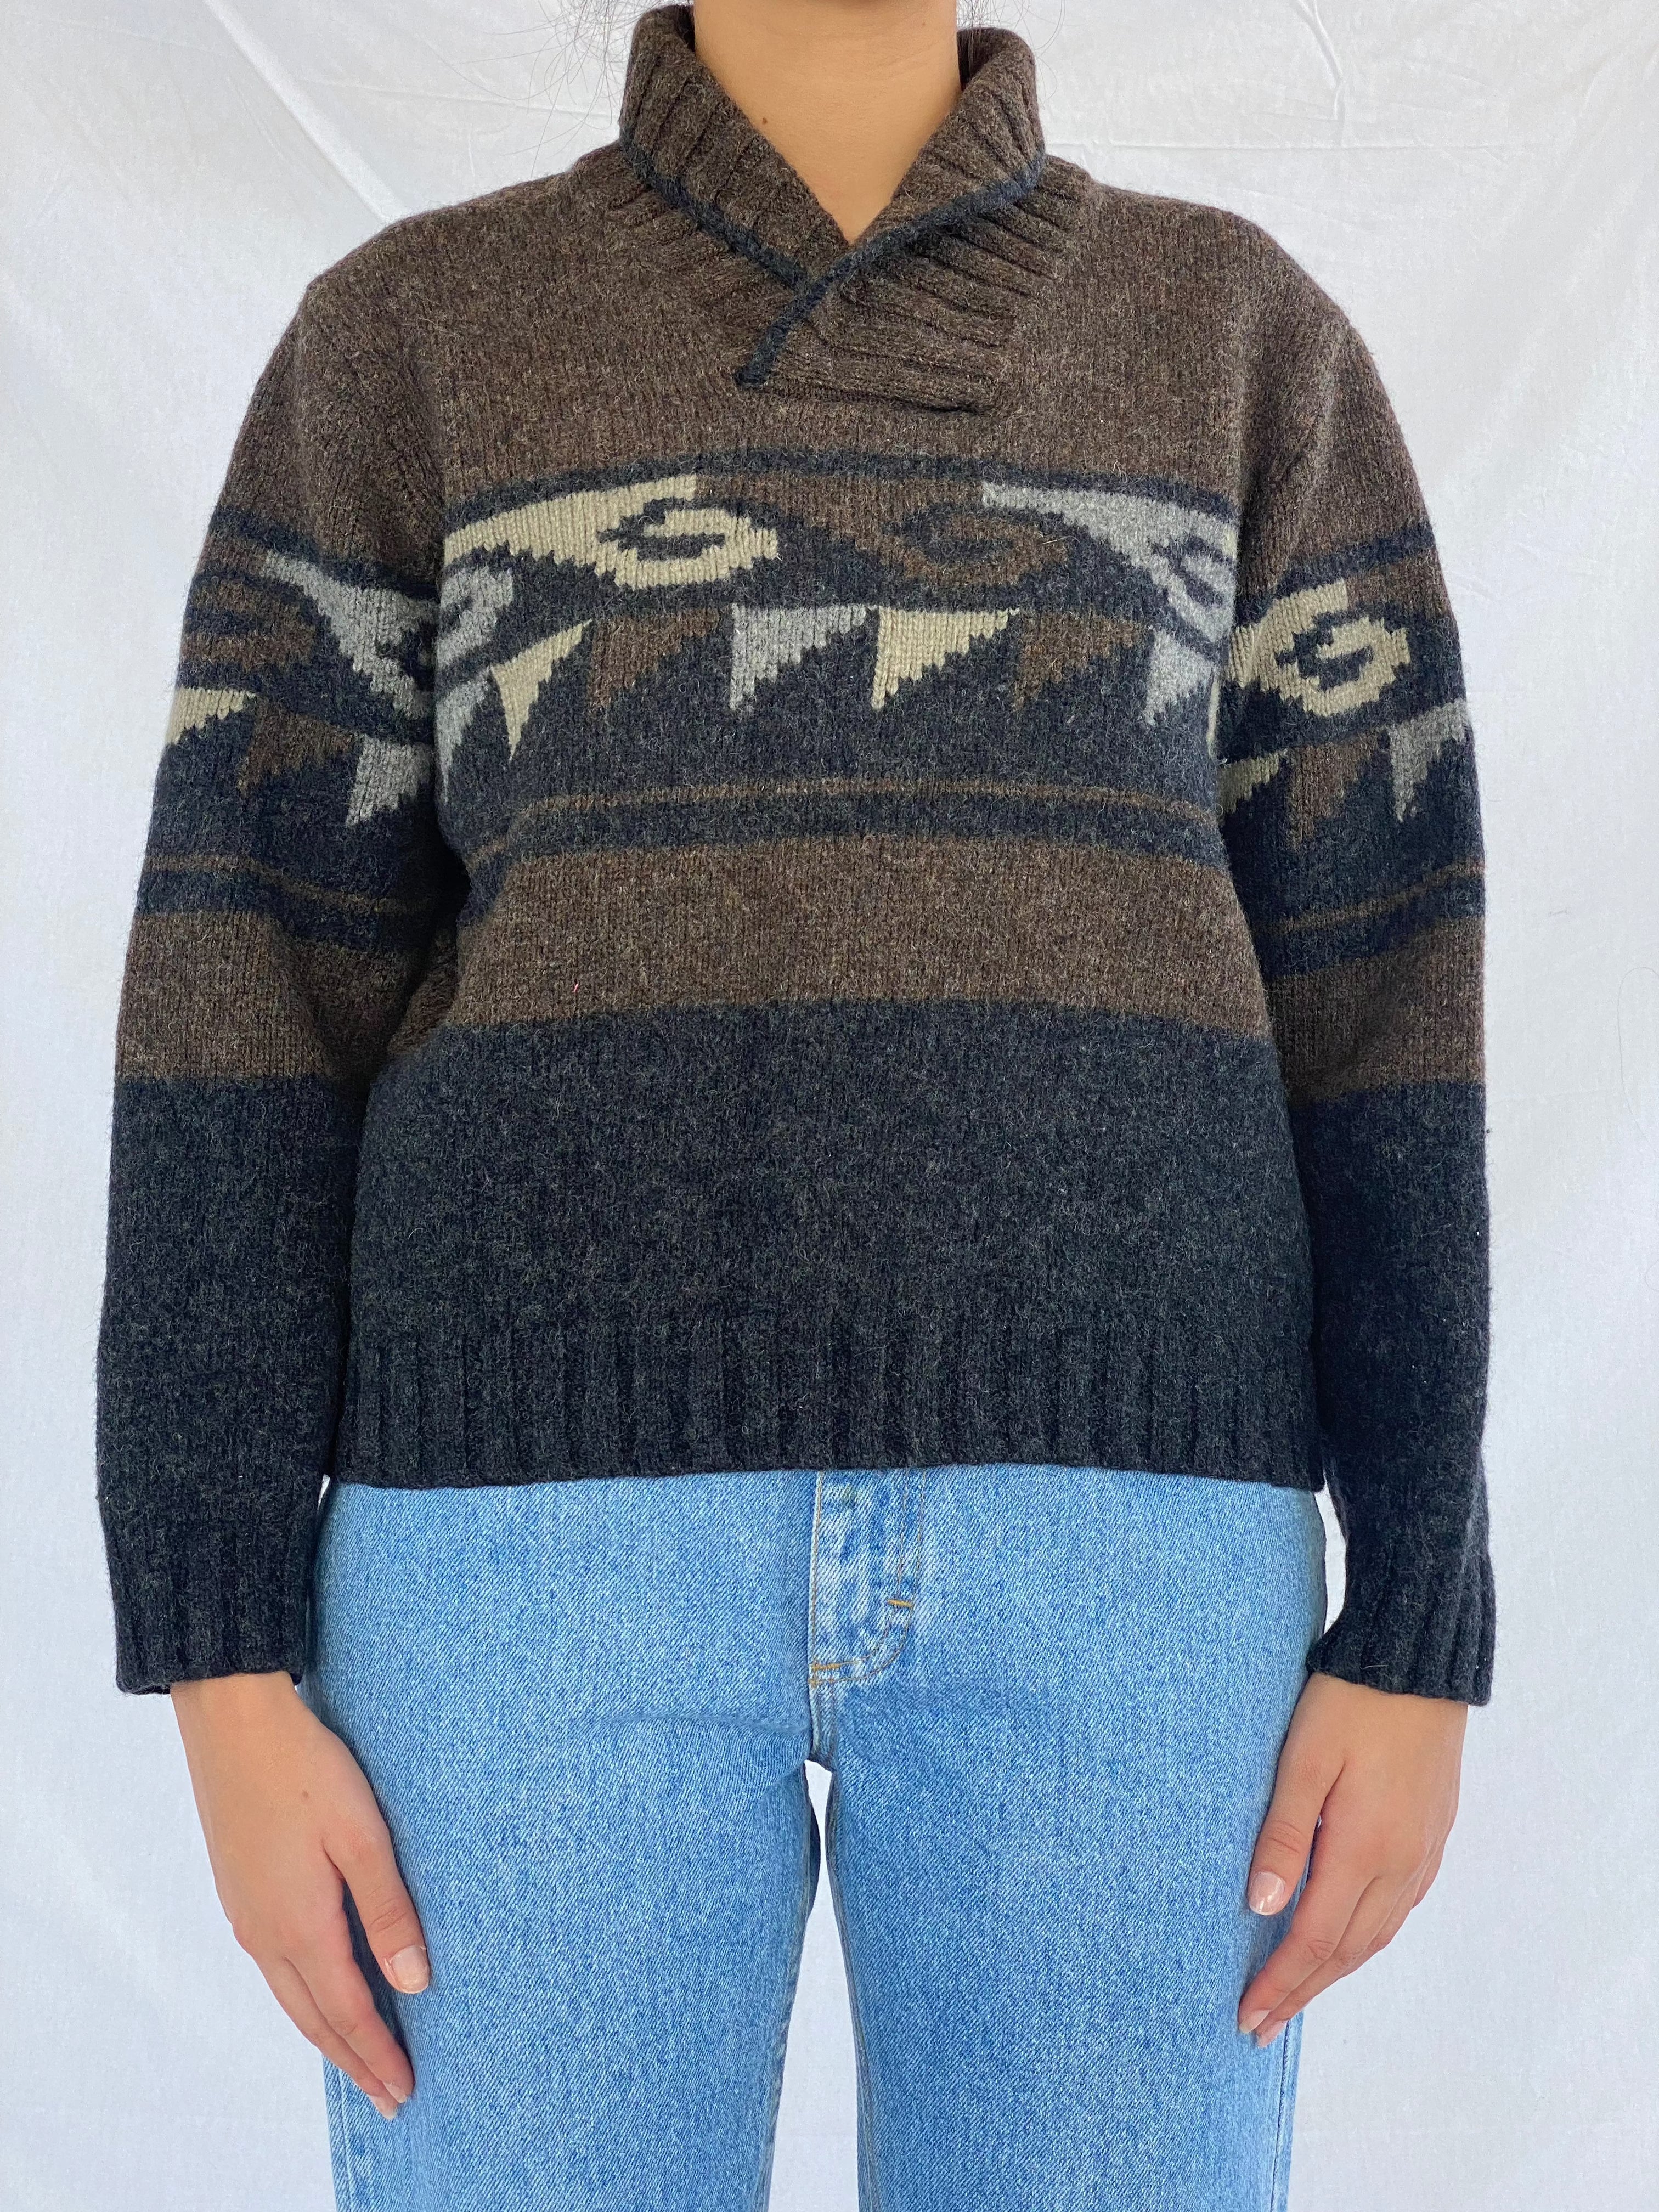 Vintage United Colors of Benetton Sweater - Balagan Vintage Sweater knitted sweater, oversized sweater, printed sweater, vintage sweater, winter